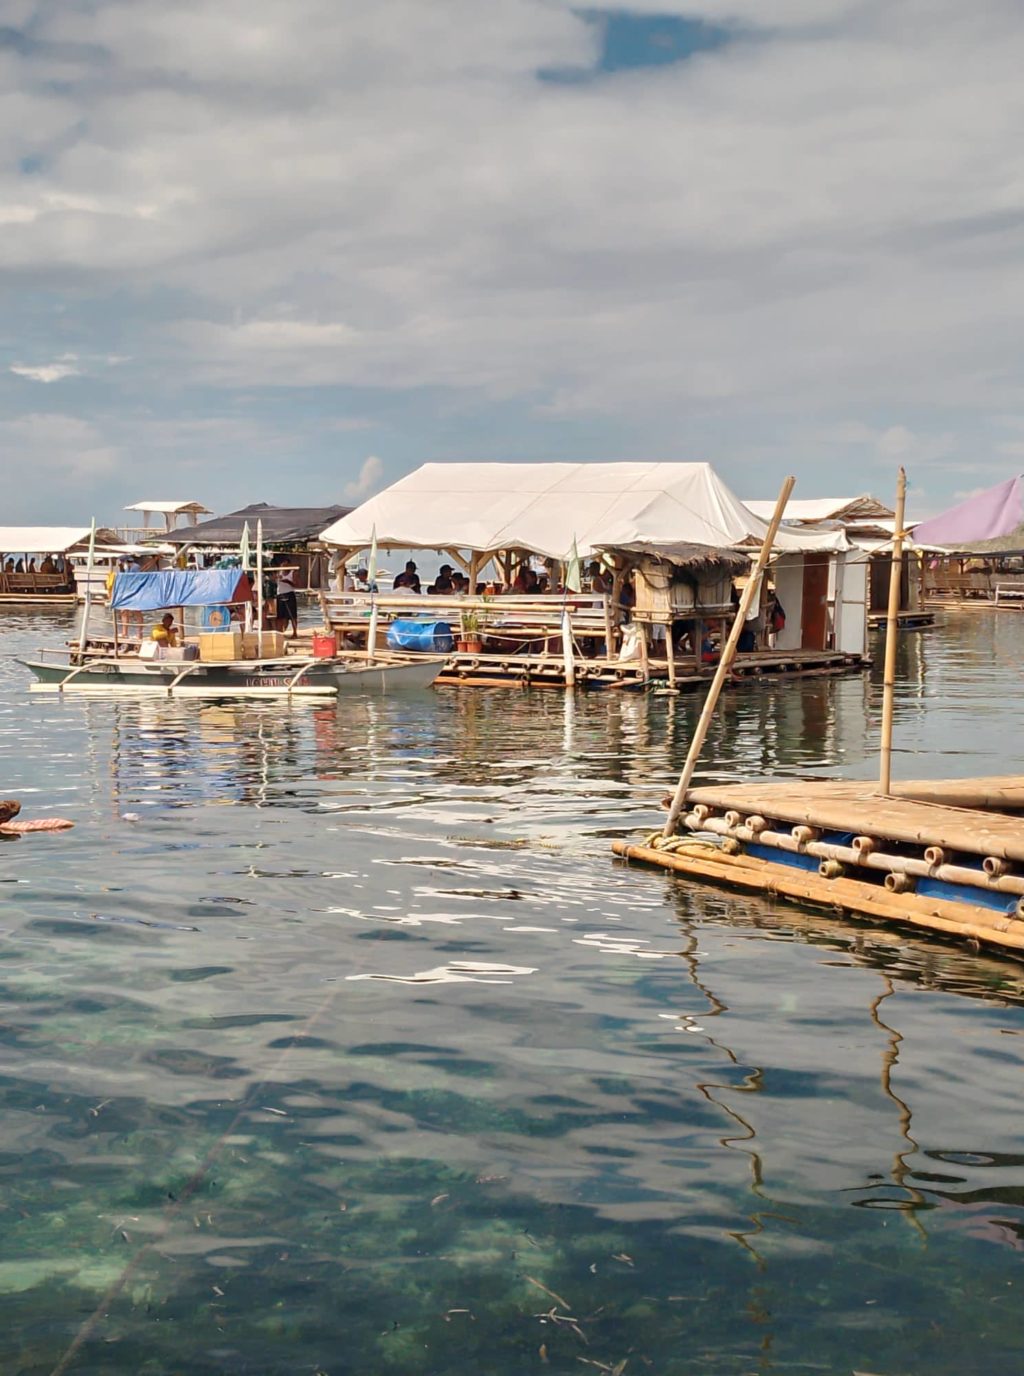 CORDOVA. Some 63 pump boat operators have availed of the 10-day special permits to ferry passengers to the floating cottages in Cordova town. | Contributed photo